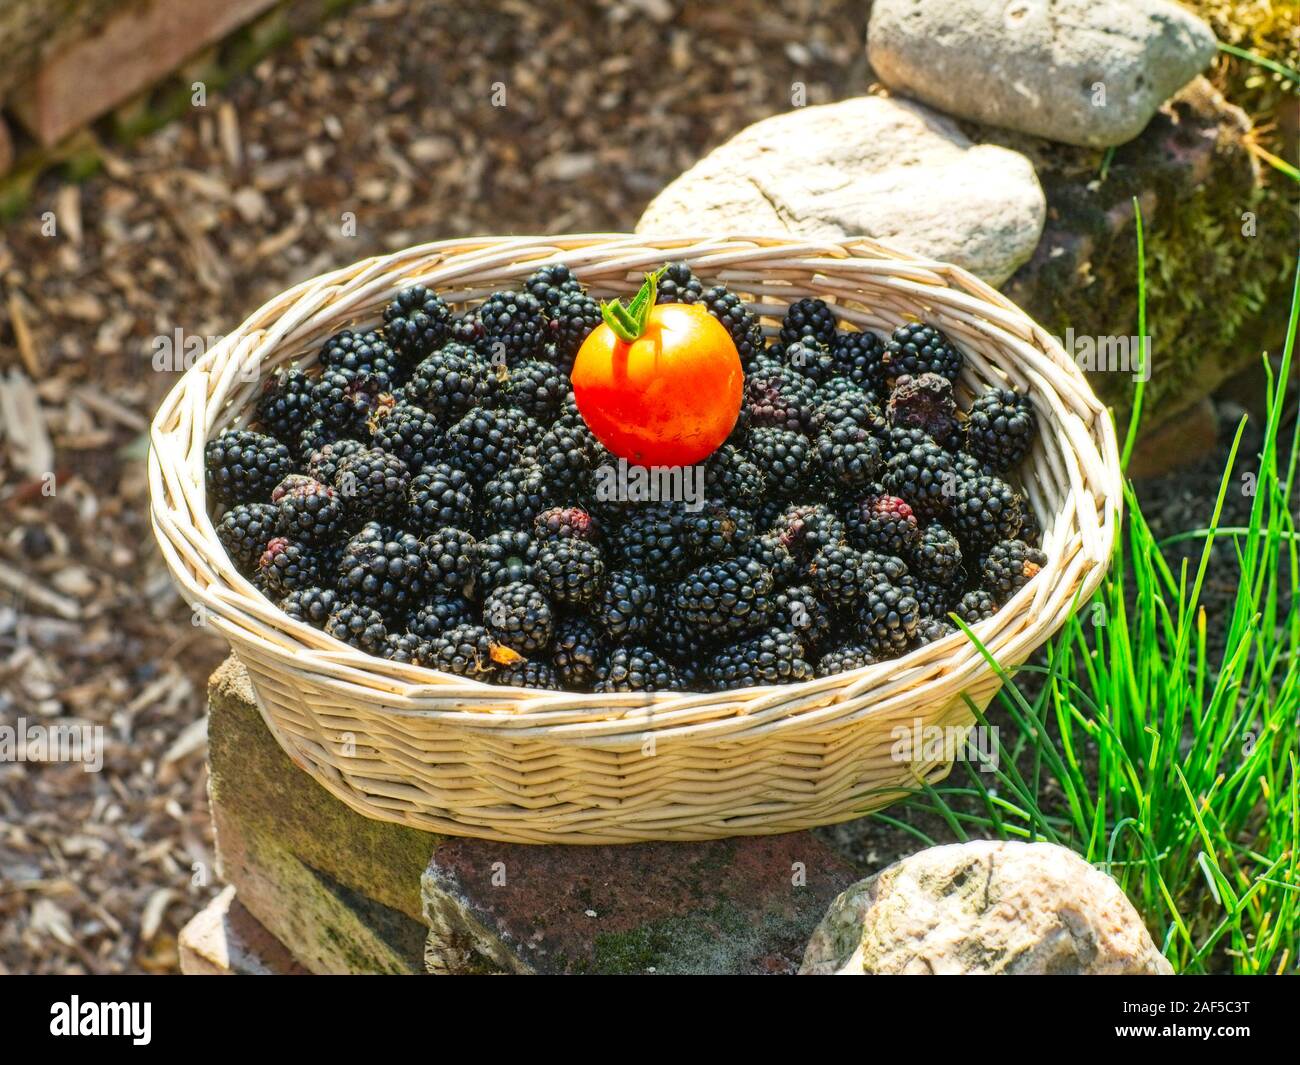 Tomato in a basket with freshly picked blackberries from my own garden. Stock Photo